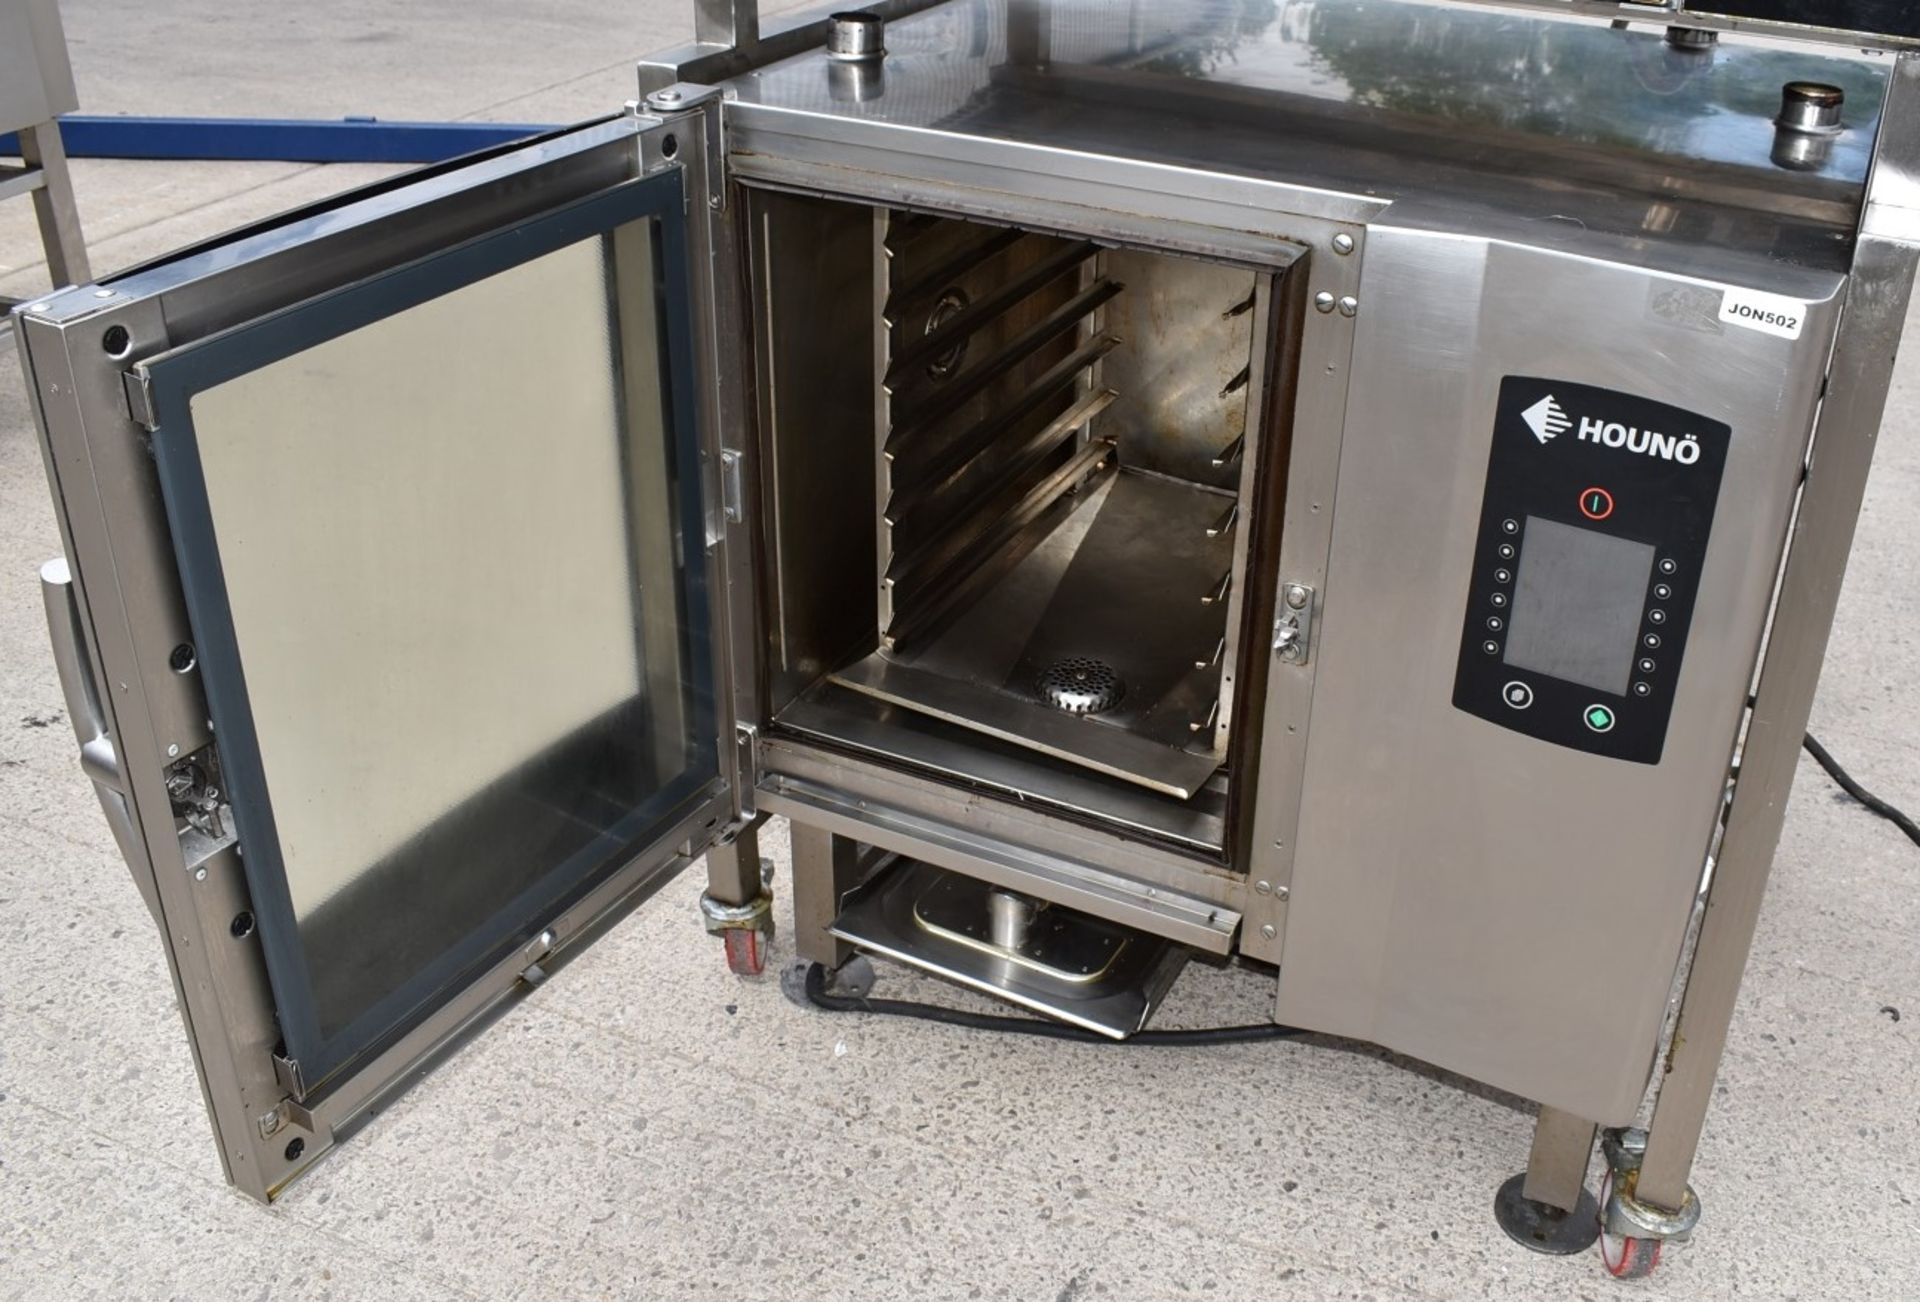 1 x Houno Electric Combi Oven and Fri-jado Rotisserie Oven Combo With Stand - 3 Phase - Image 19 of 22